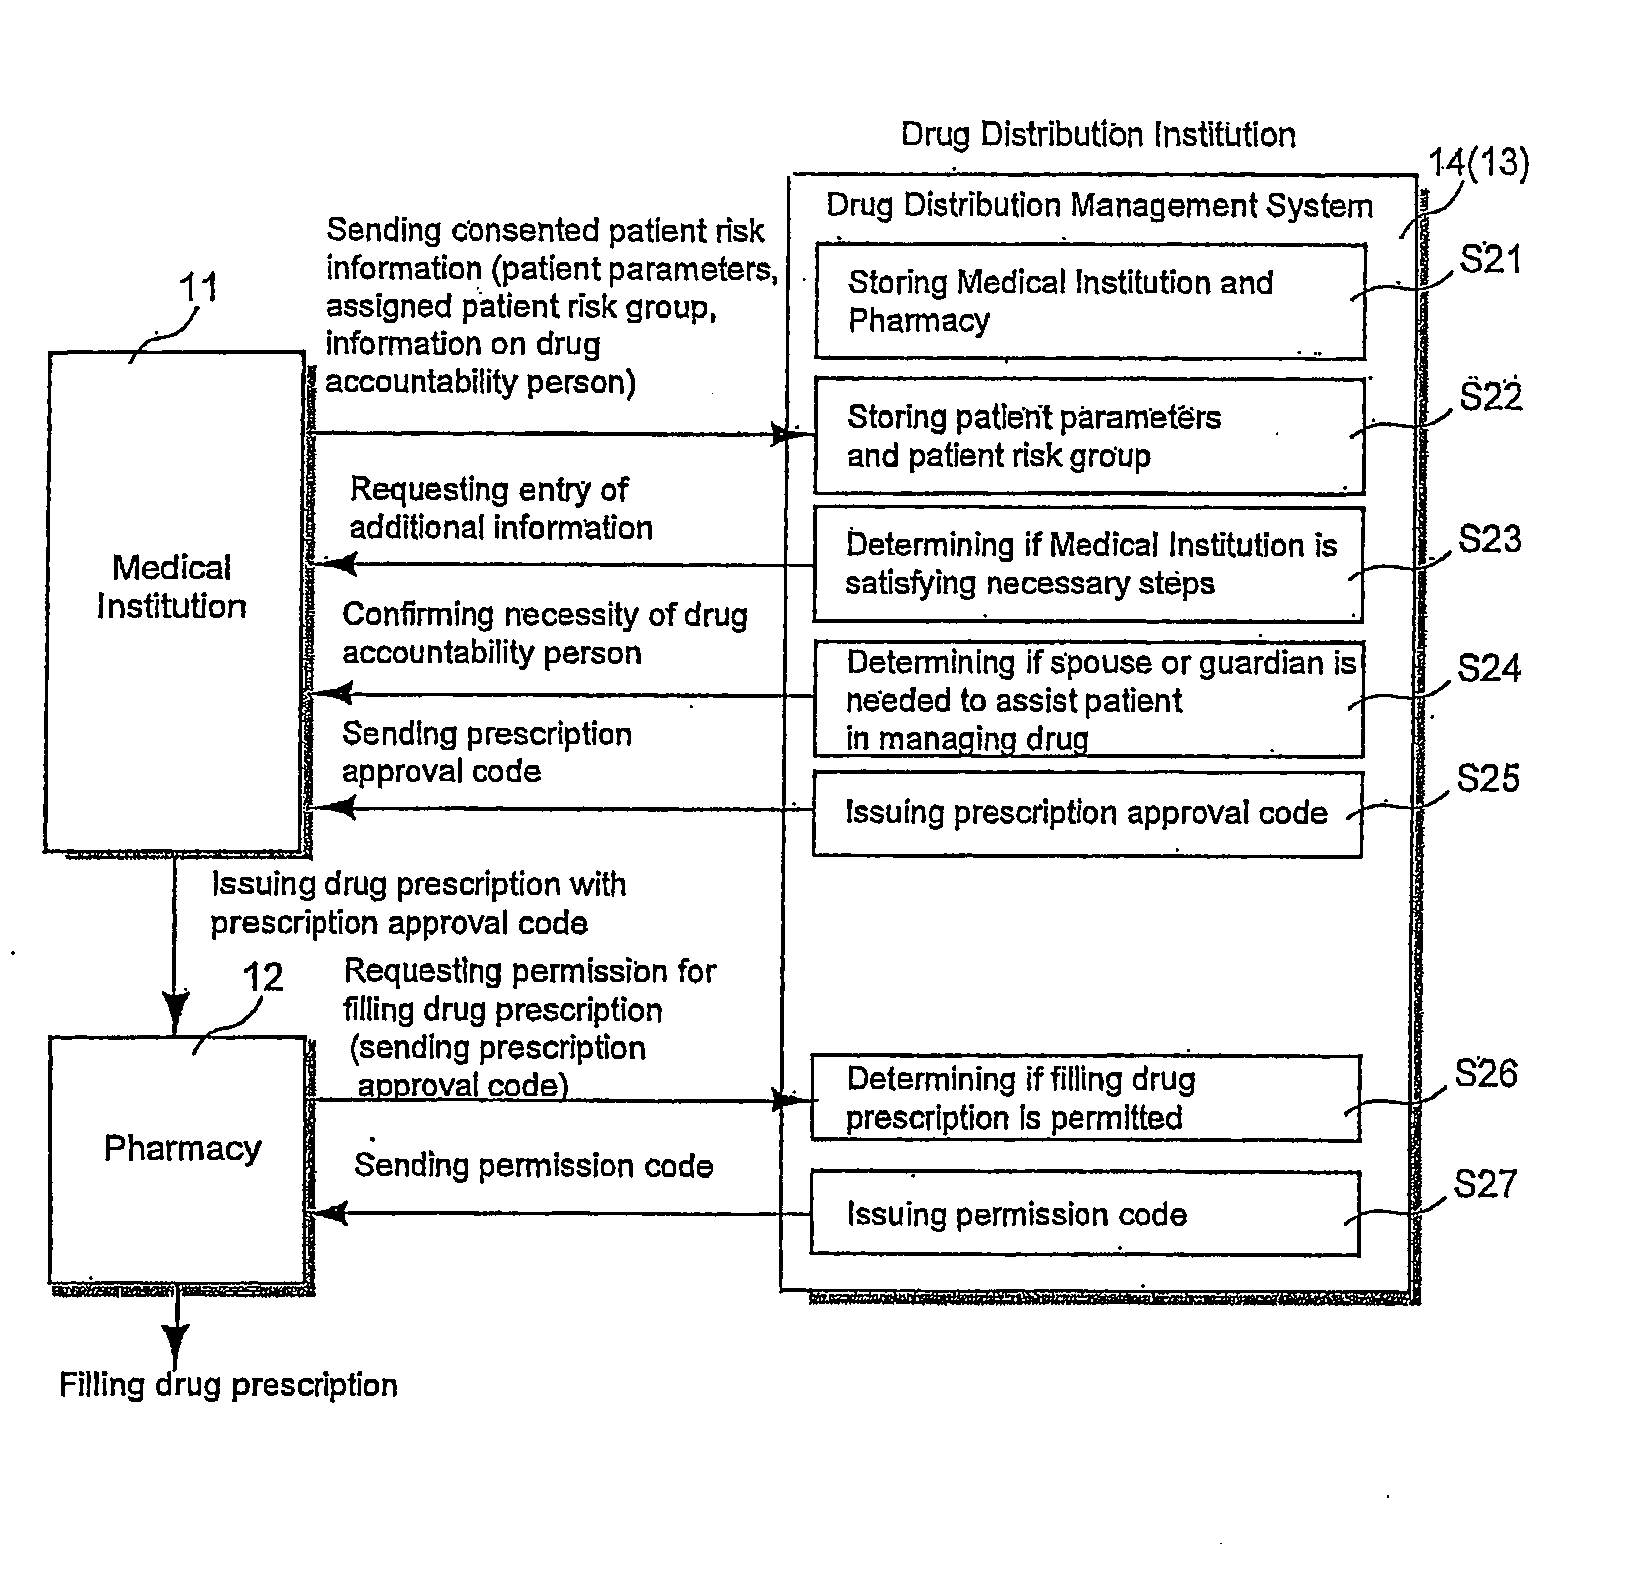 Methods for delivering a drug to a patient while restricting access to the drug by patients for whom the drug may be contraindicated